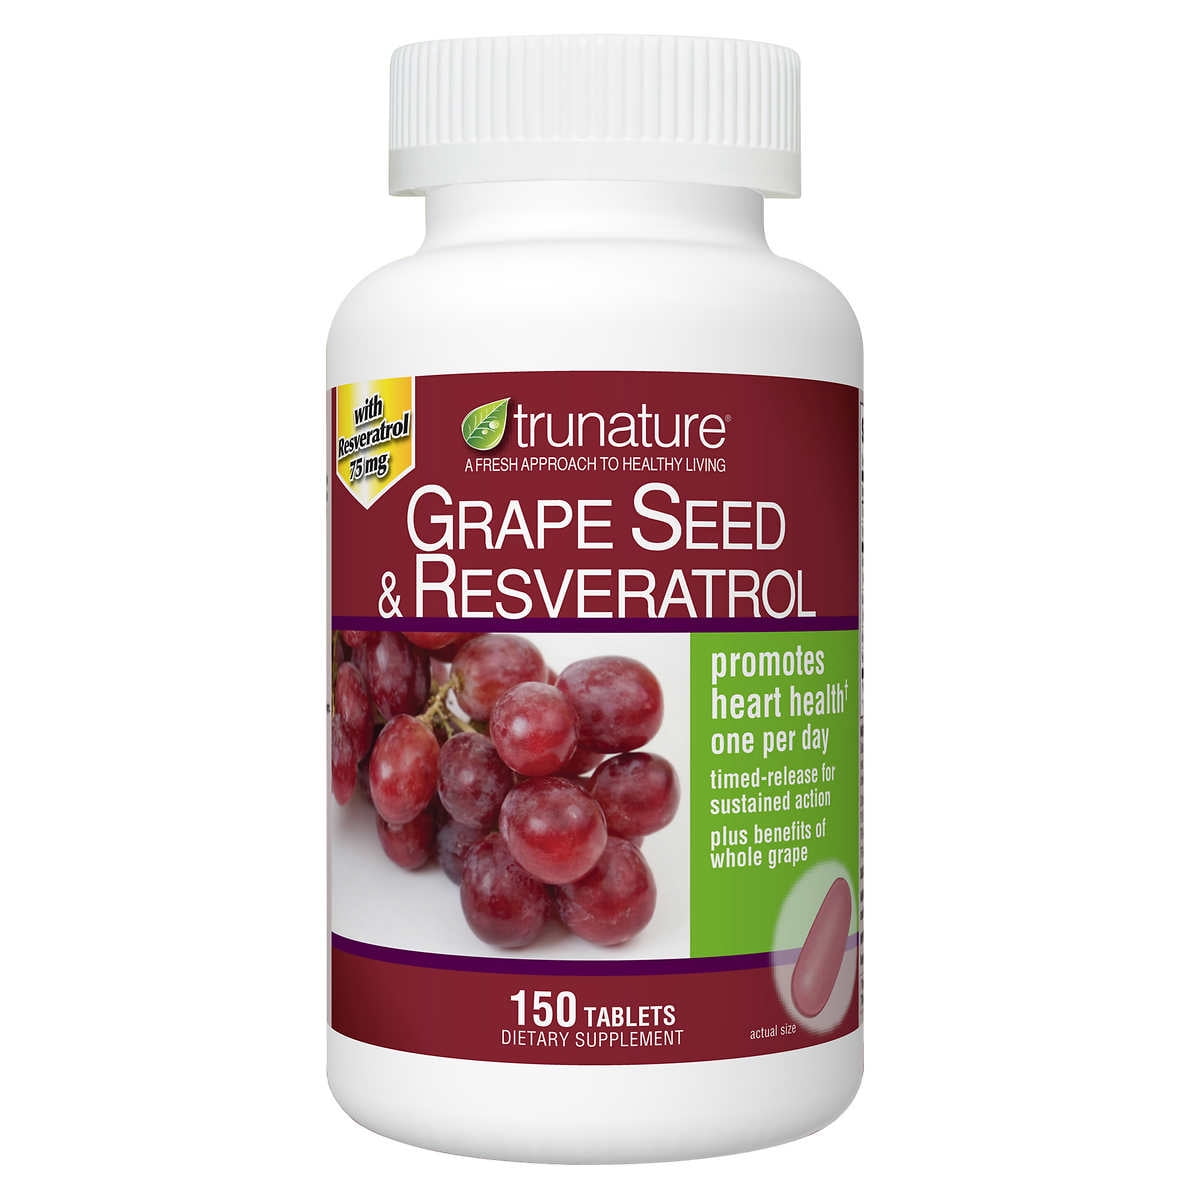 Trunature Grape Seed with Resveratrol 75 mg - 150 tablets